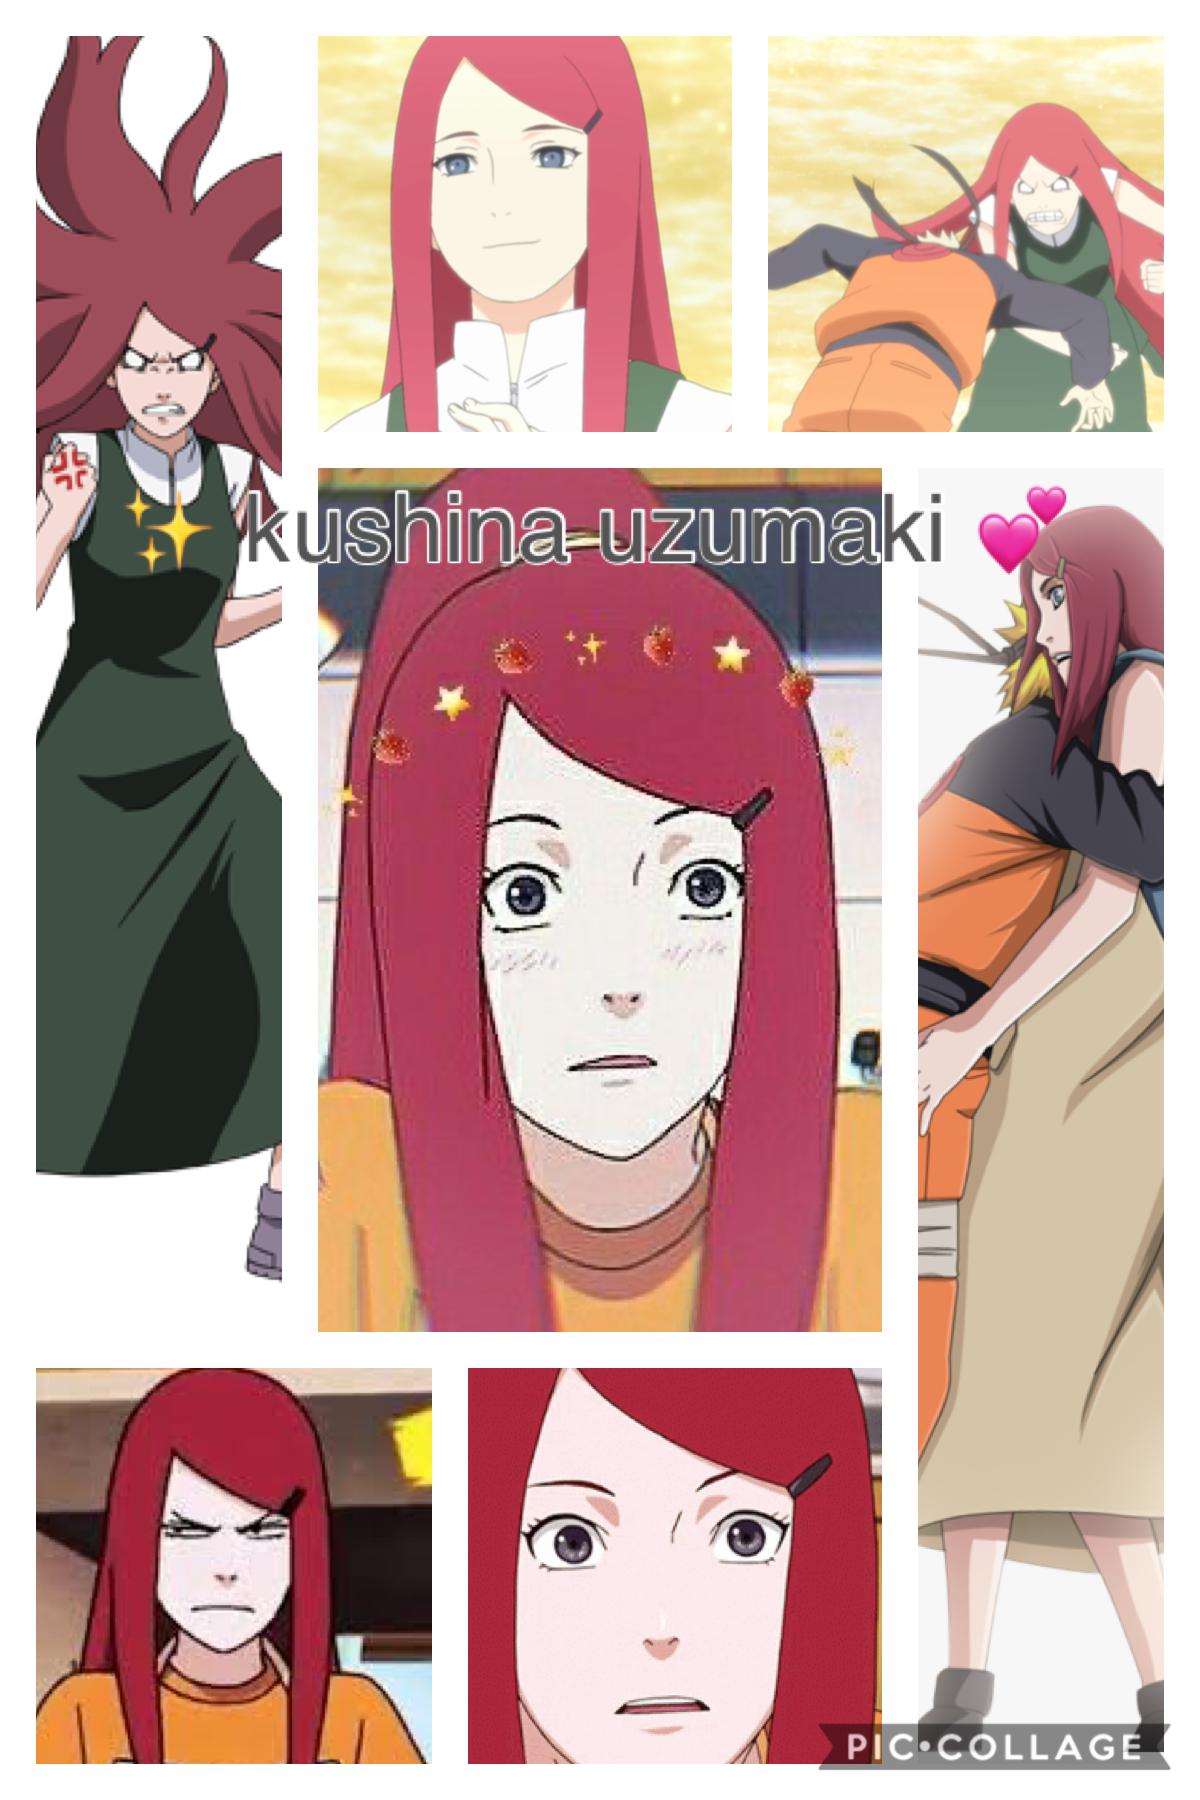 | click here |
kushina uzumaki ✨💕 i love her and i wish she was still alive but we all know that ain’t happening. also i k n o w i haven’t posted in forever but like it’s not like anyone looks at them anyways 😮😅 i hope everyone’s doin, fine 👌 